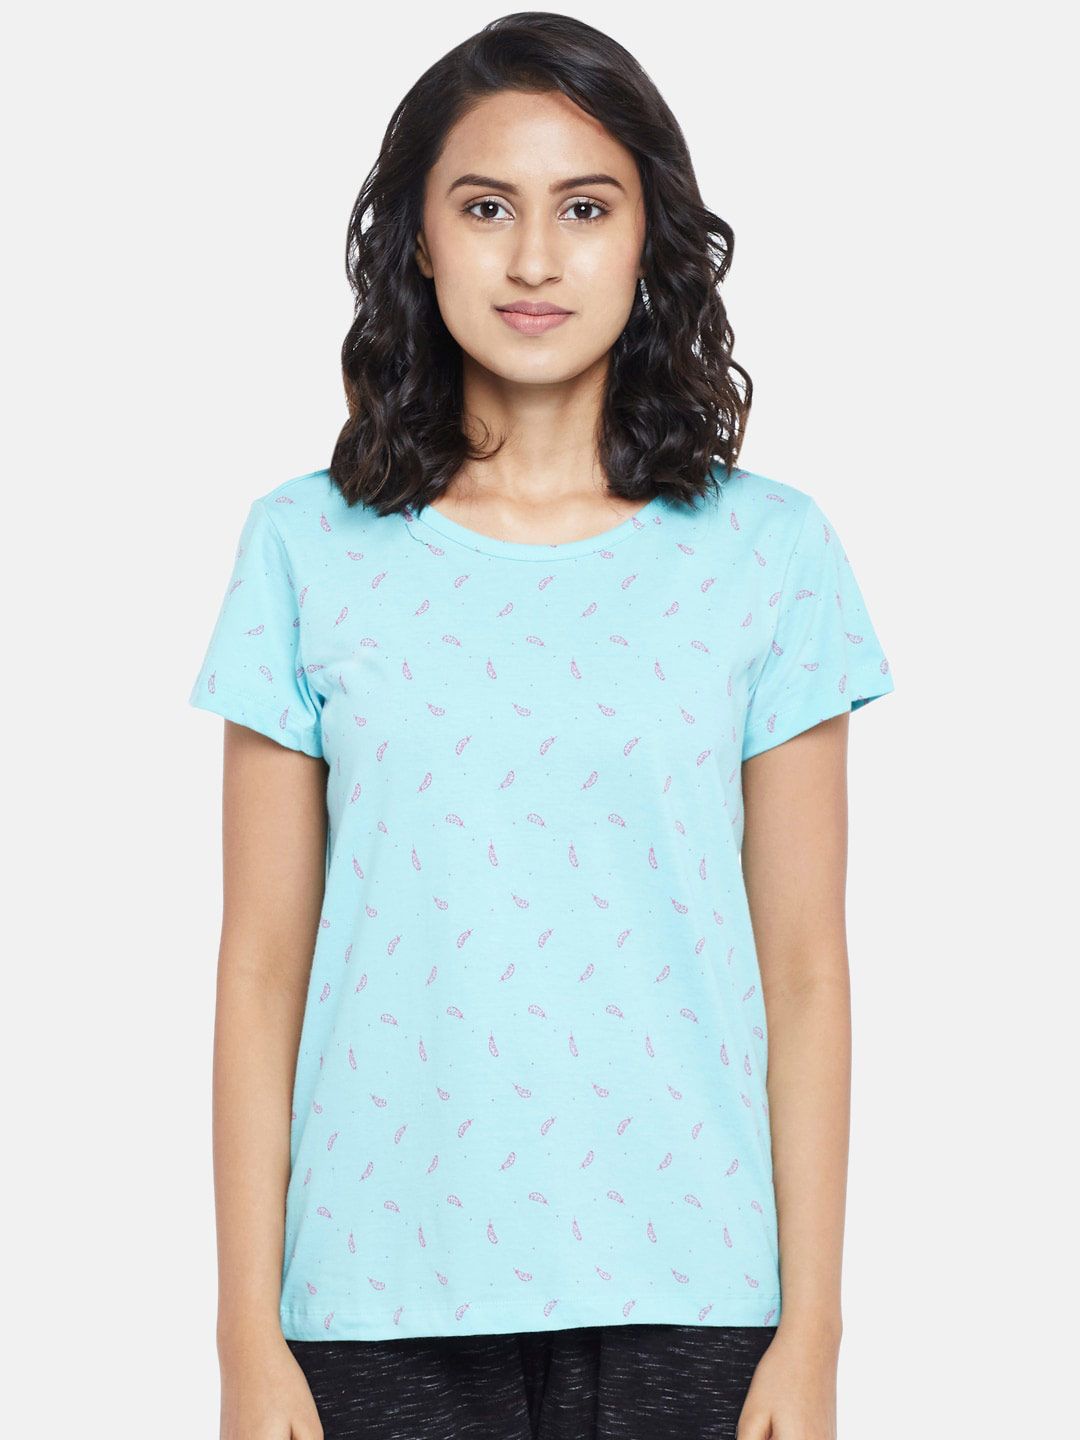 Dreamz by Pantaloons Women Blue & Pink Printed Cotton Lounge T-shirt Price in India